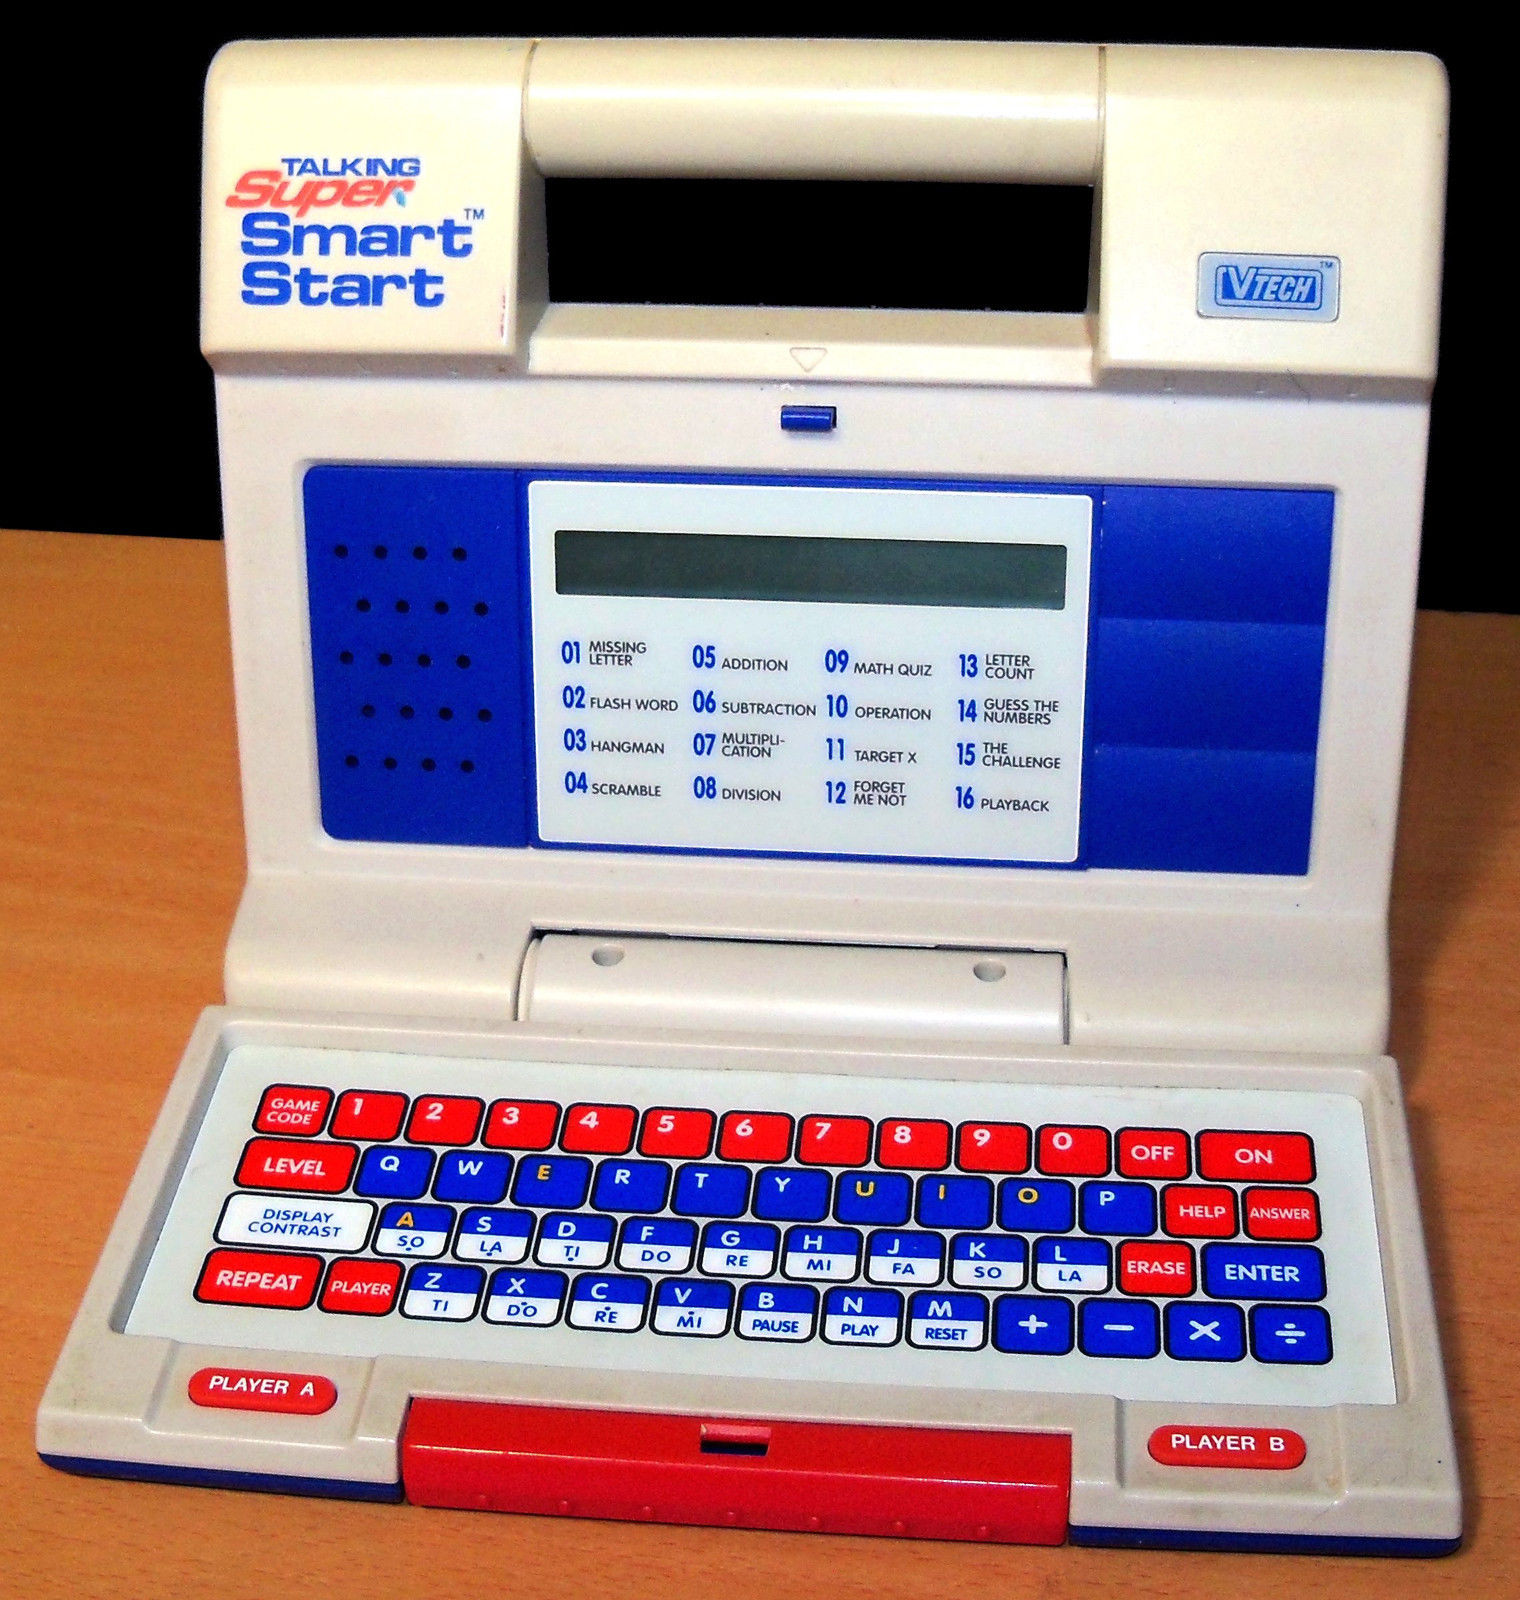 13 Educational Toys That Made Us Feel Like We Were Super Technologically Advanced